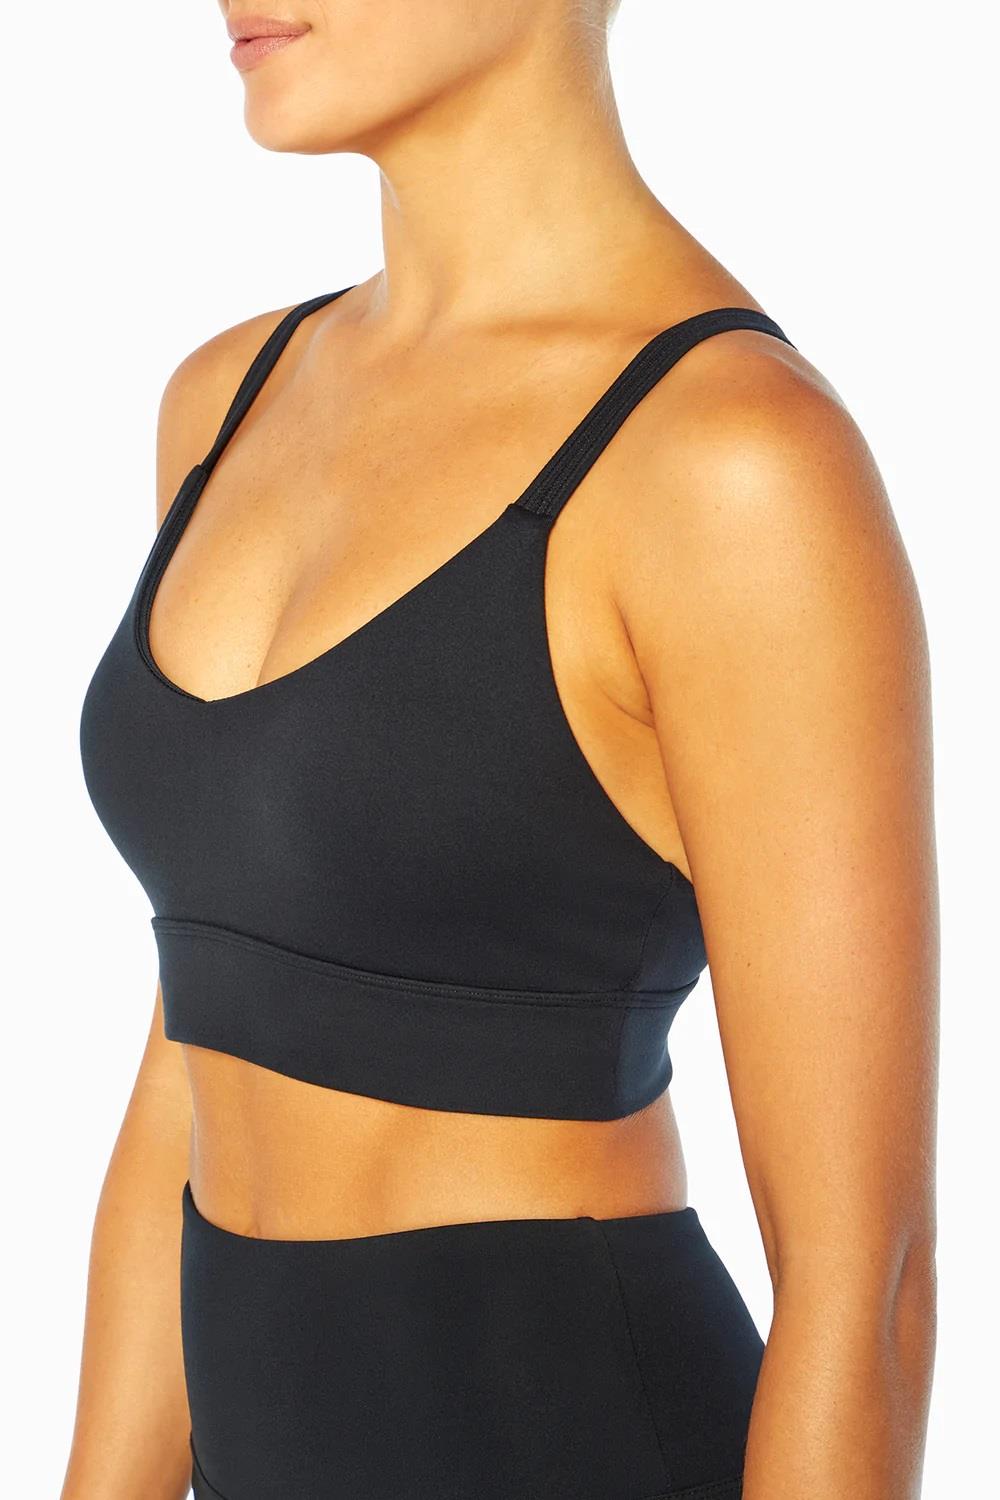 Freely Academy Sports Bra Yoga Top Non-Wired Padded Crossback Gym Workout Comfy